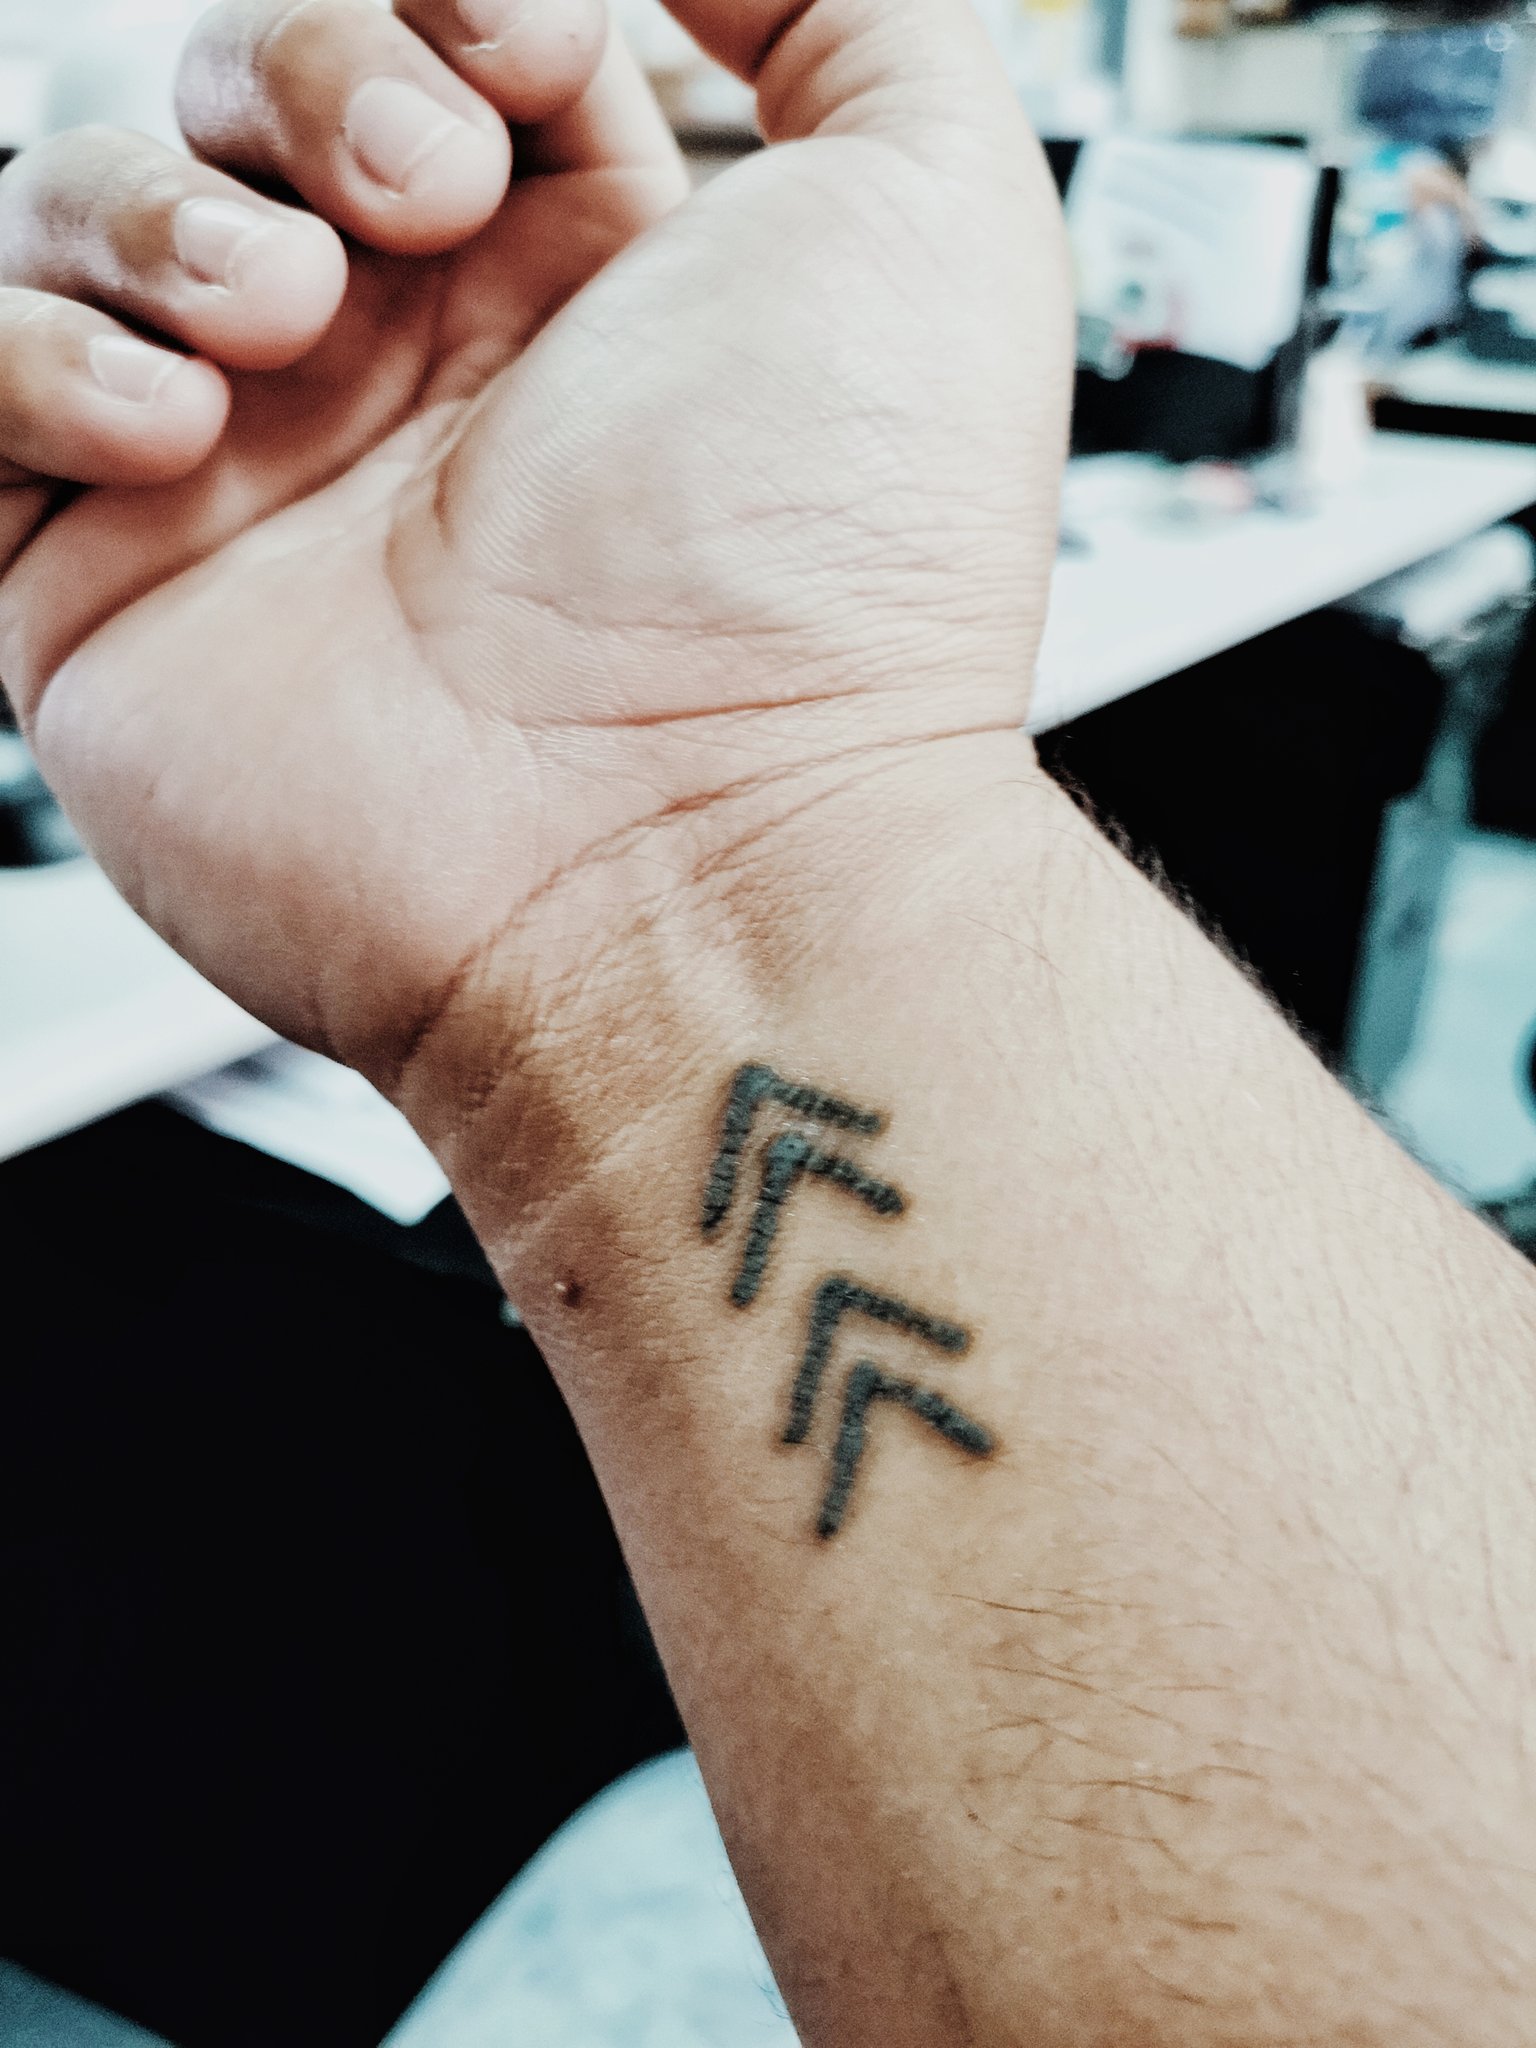 The Meanings Behind The Arrow Tattoo: A Growing Trend